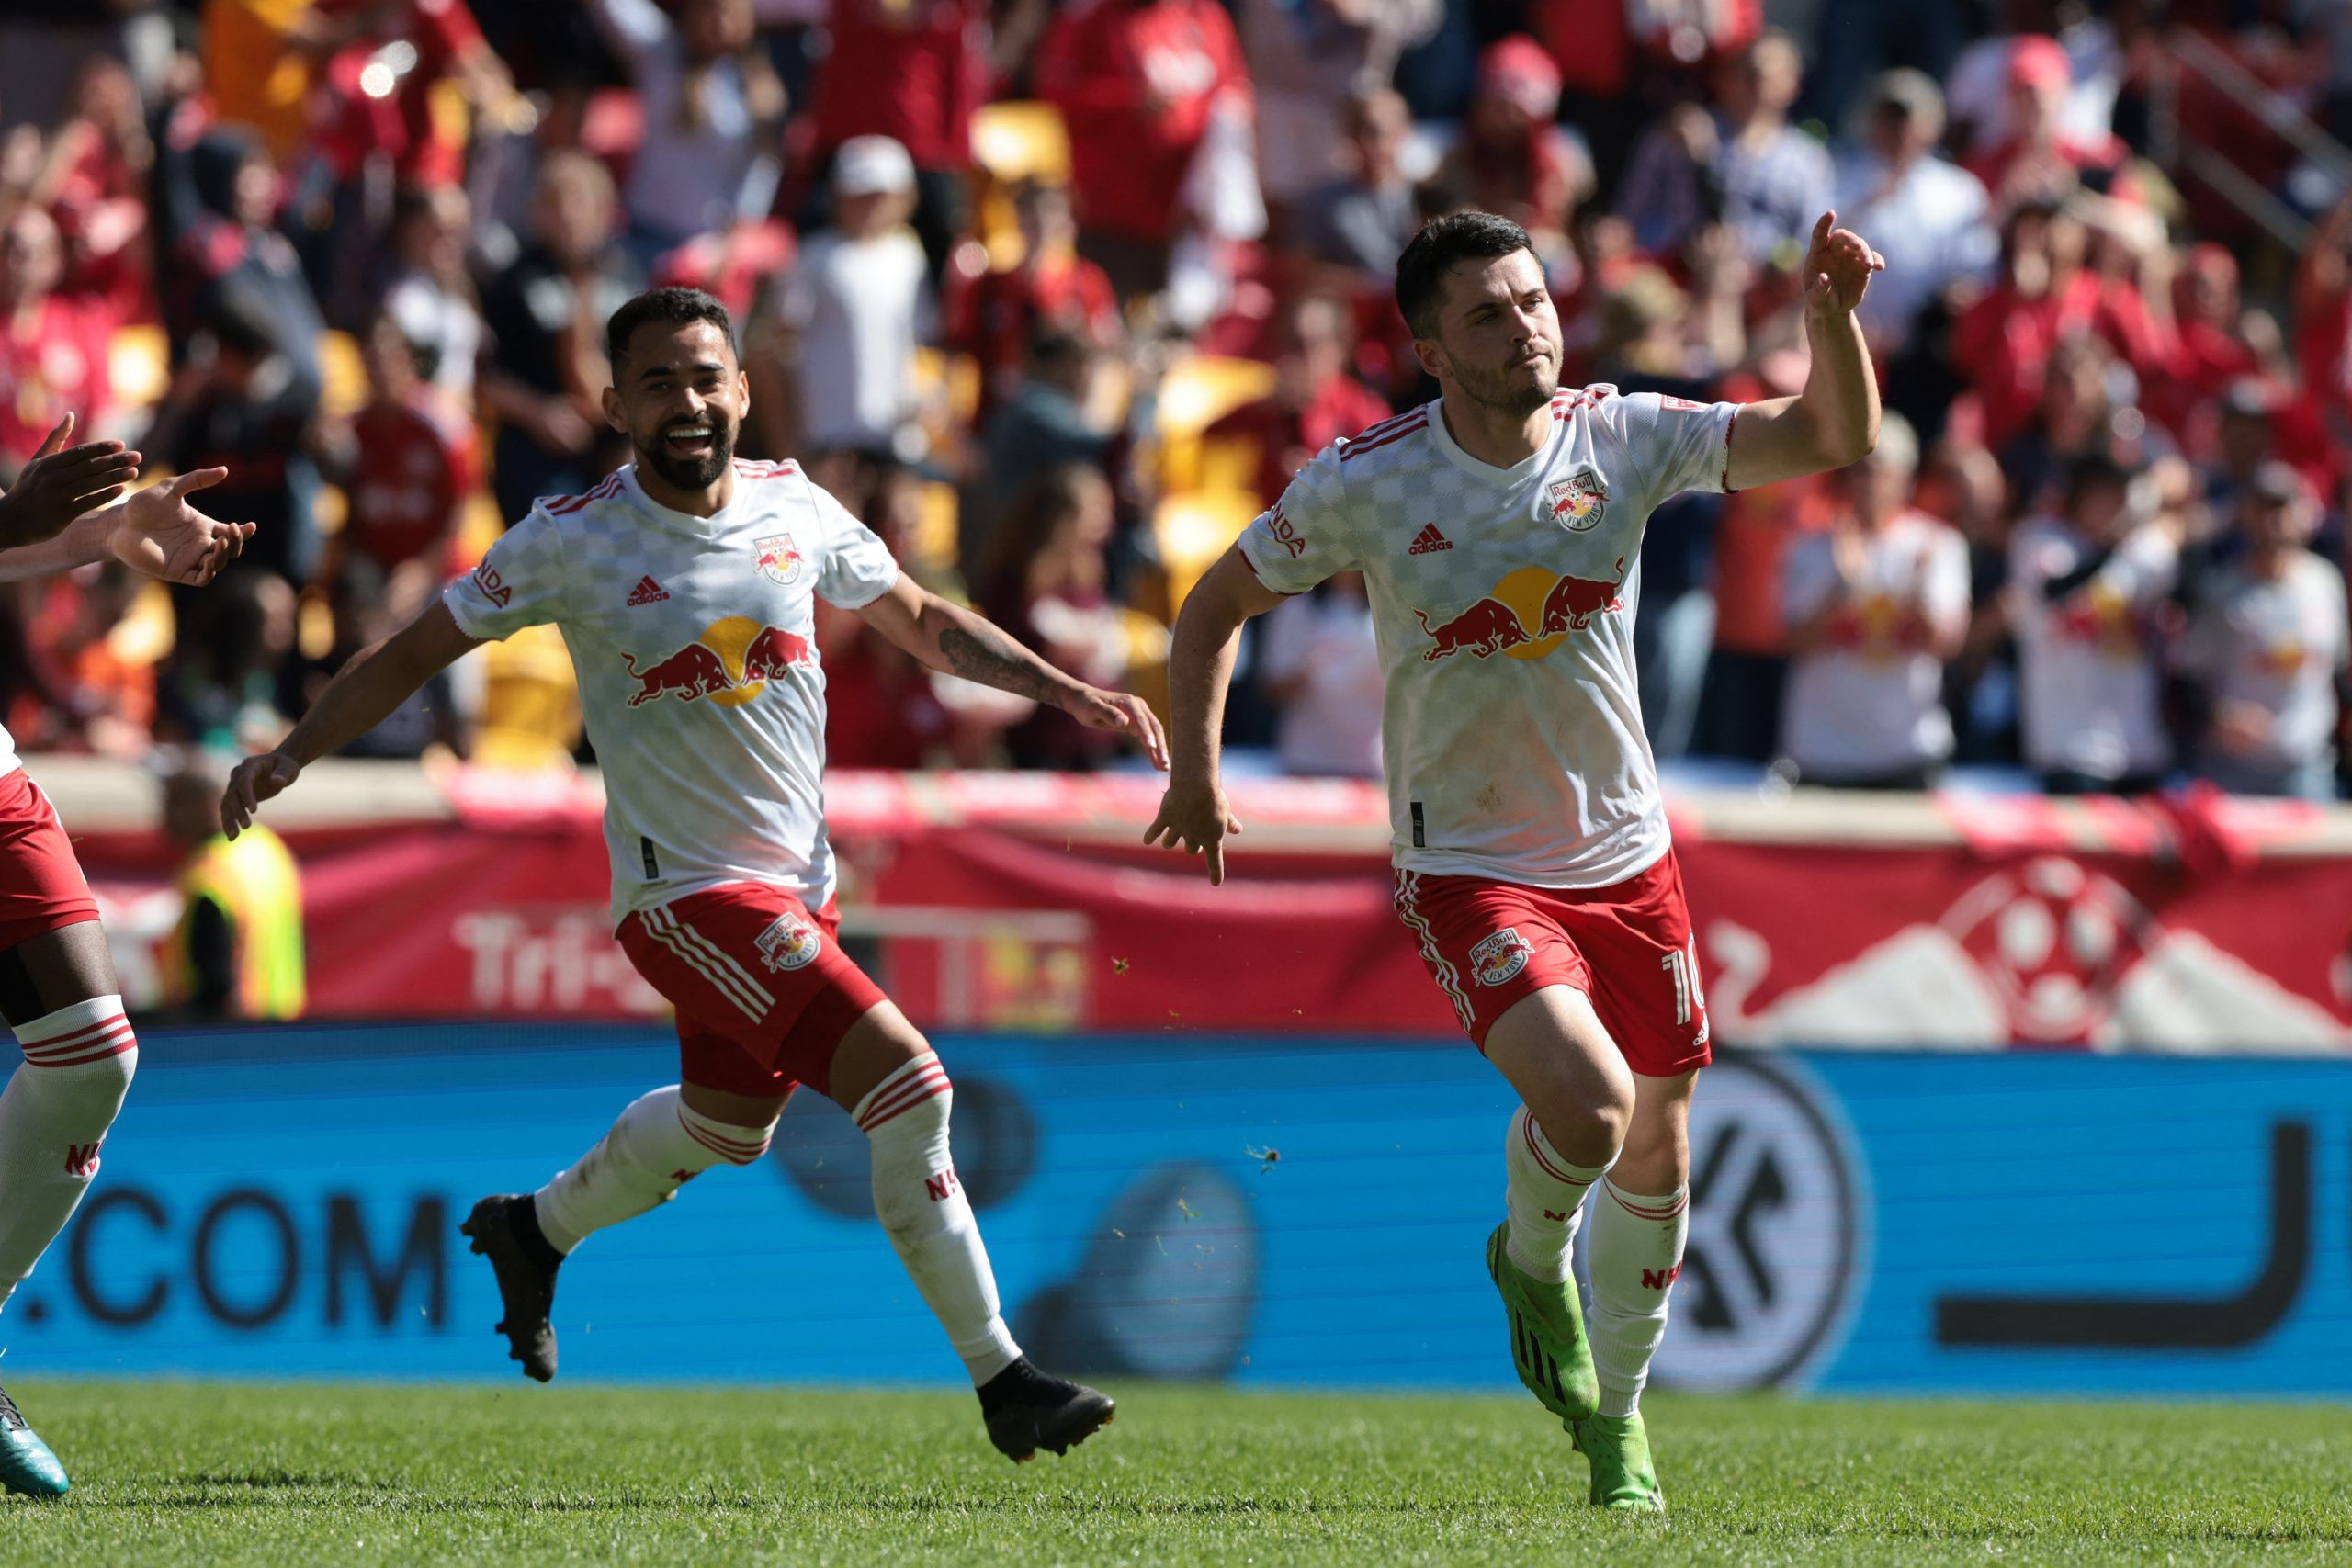 Oct 15, 2022; Harrison, New Jersey, USA; New York Red Bulls midfielder Lewis Morgan (10) celebrates with midfielder Luquinhas (82) after scoring a goal against FC Cincinnati during the second half at Red Bull Arena. Mandatory Credit: Vincent Carchietta-USA TODAY Sports